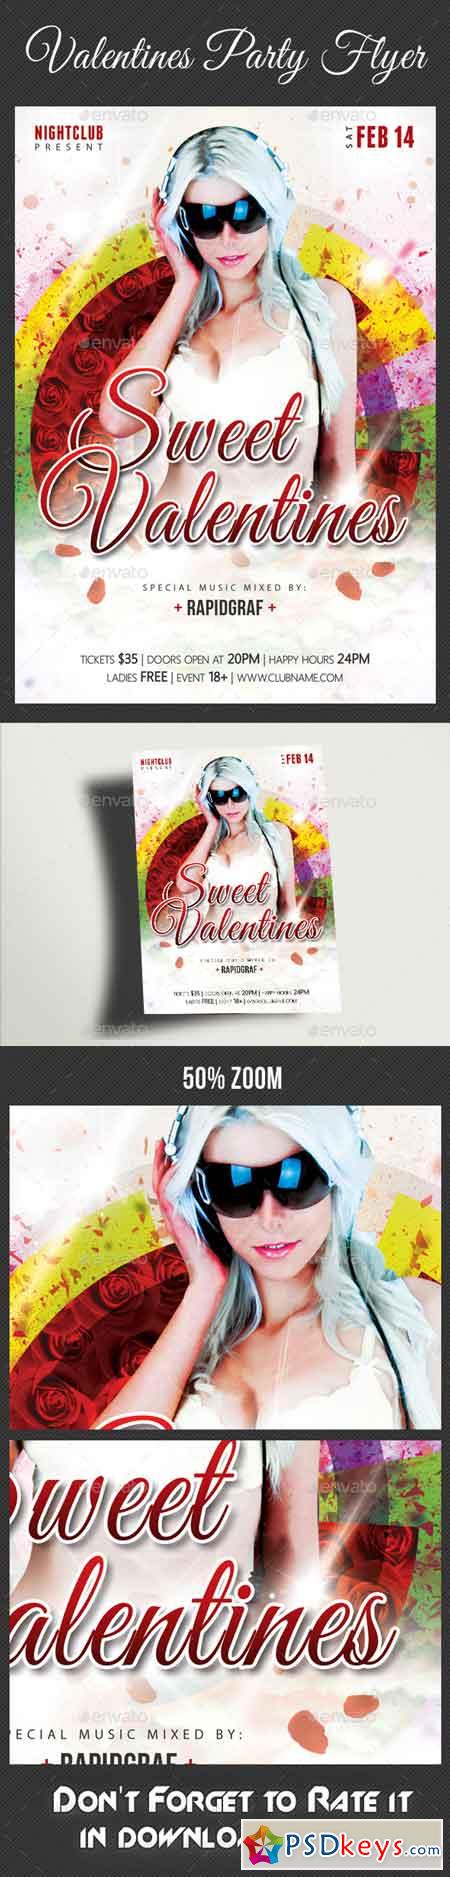 Valentines Day Party Flyer Template 02 10343721